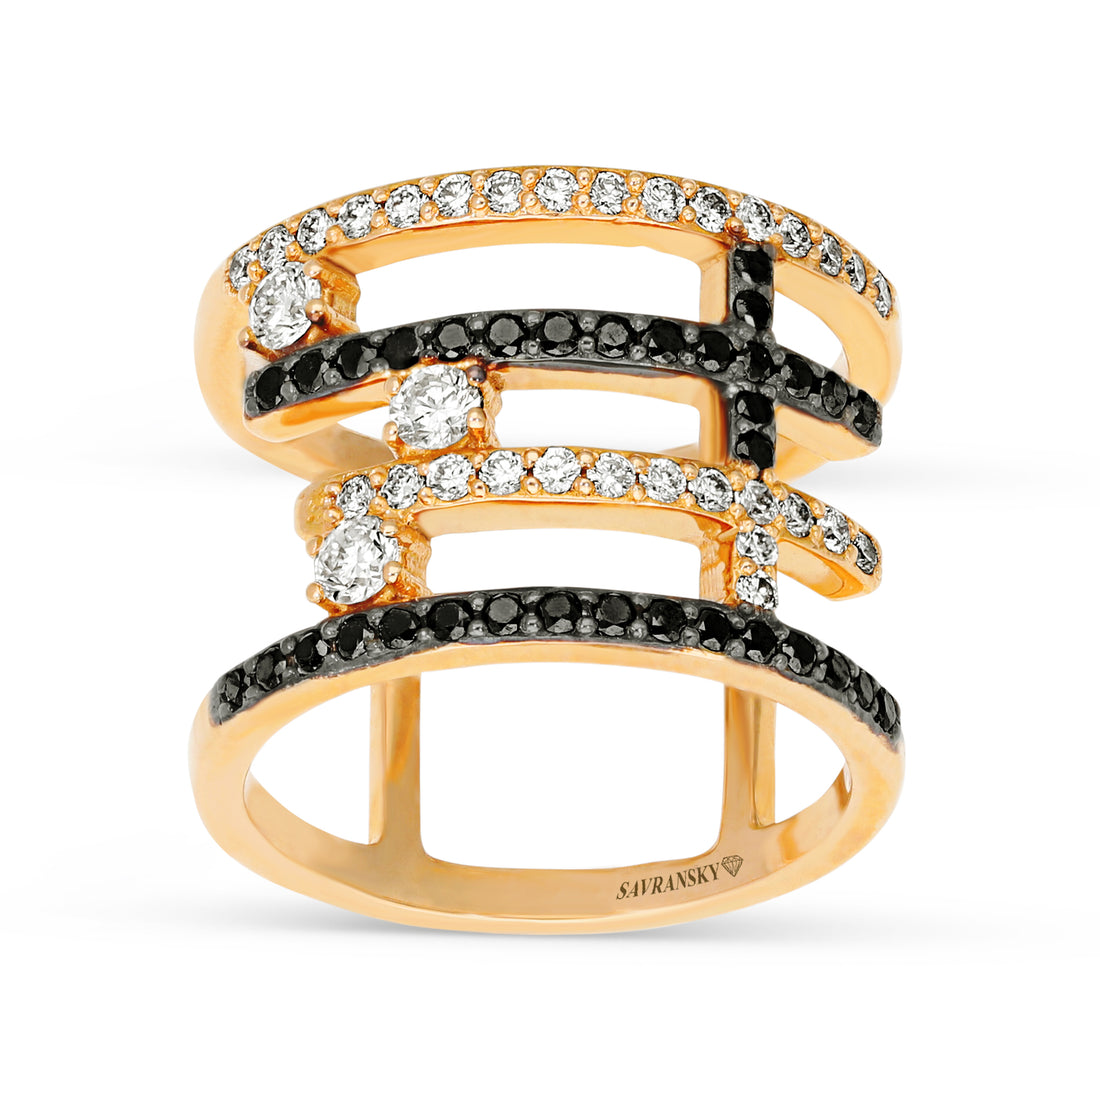 Multi Row Bypass Rose Gold White and Black Diamond Ring